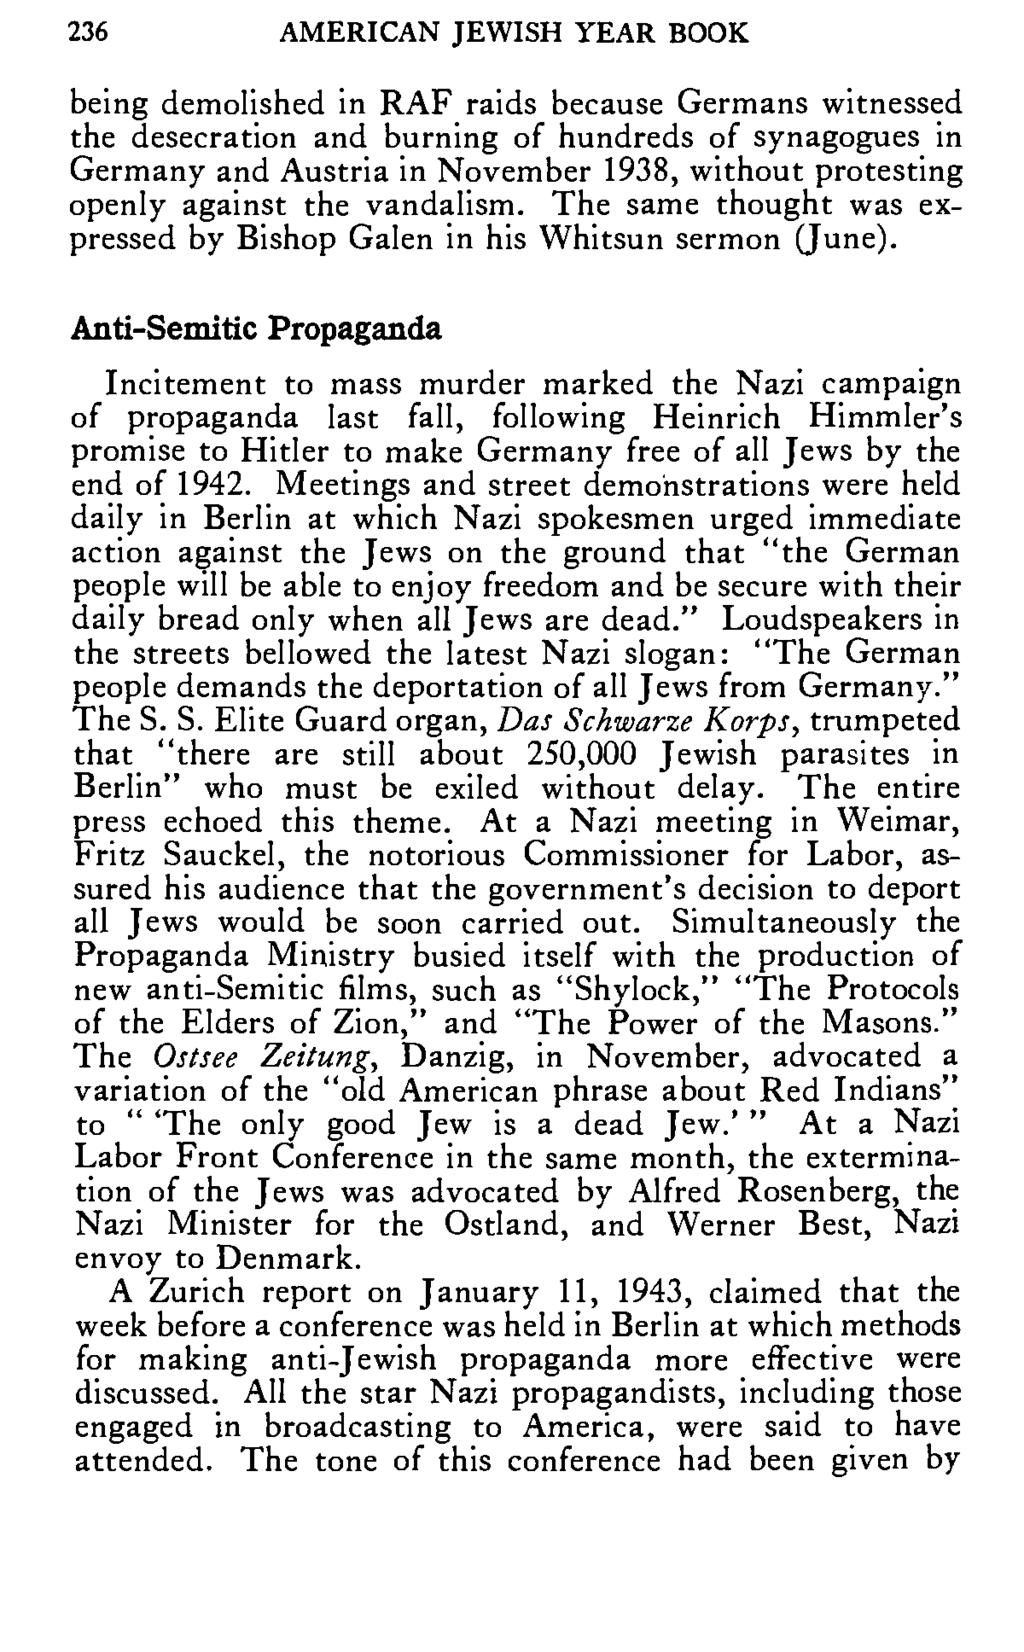 236 AMERICAN JEWISH YEAR BOOK being demolished in RAF raids because Germans witnessed the desecration and burning of hundreds of synagogues in Germany and Austria in November 1938, without protesting